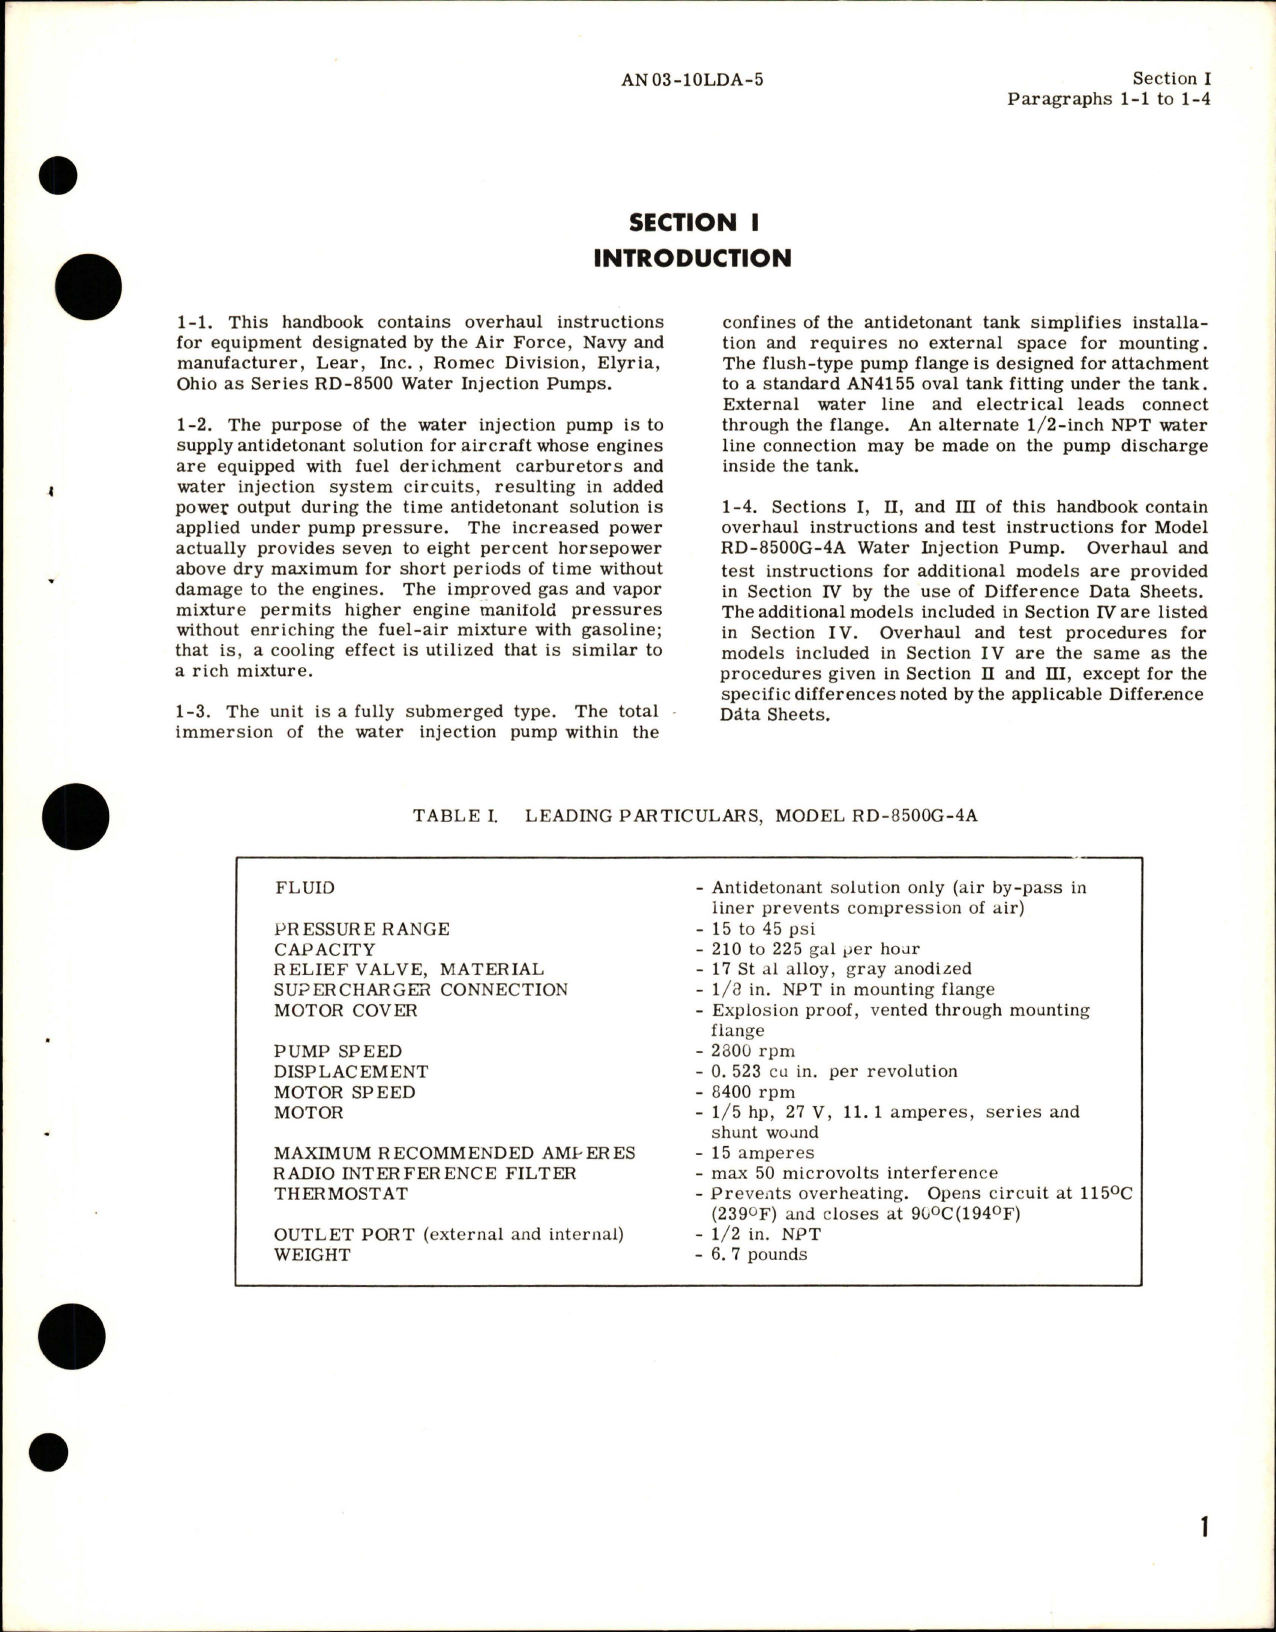 Sample page 5 from AirCorps Library document: Overhaul Instructions for Fully Submerged Type Water Injection Pumps - RD-8500 Series